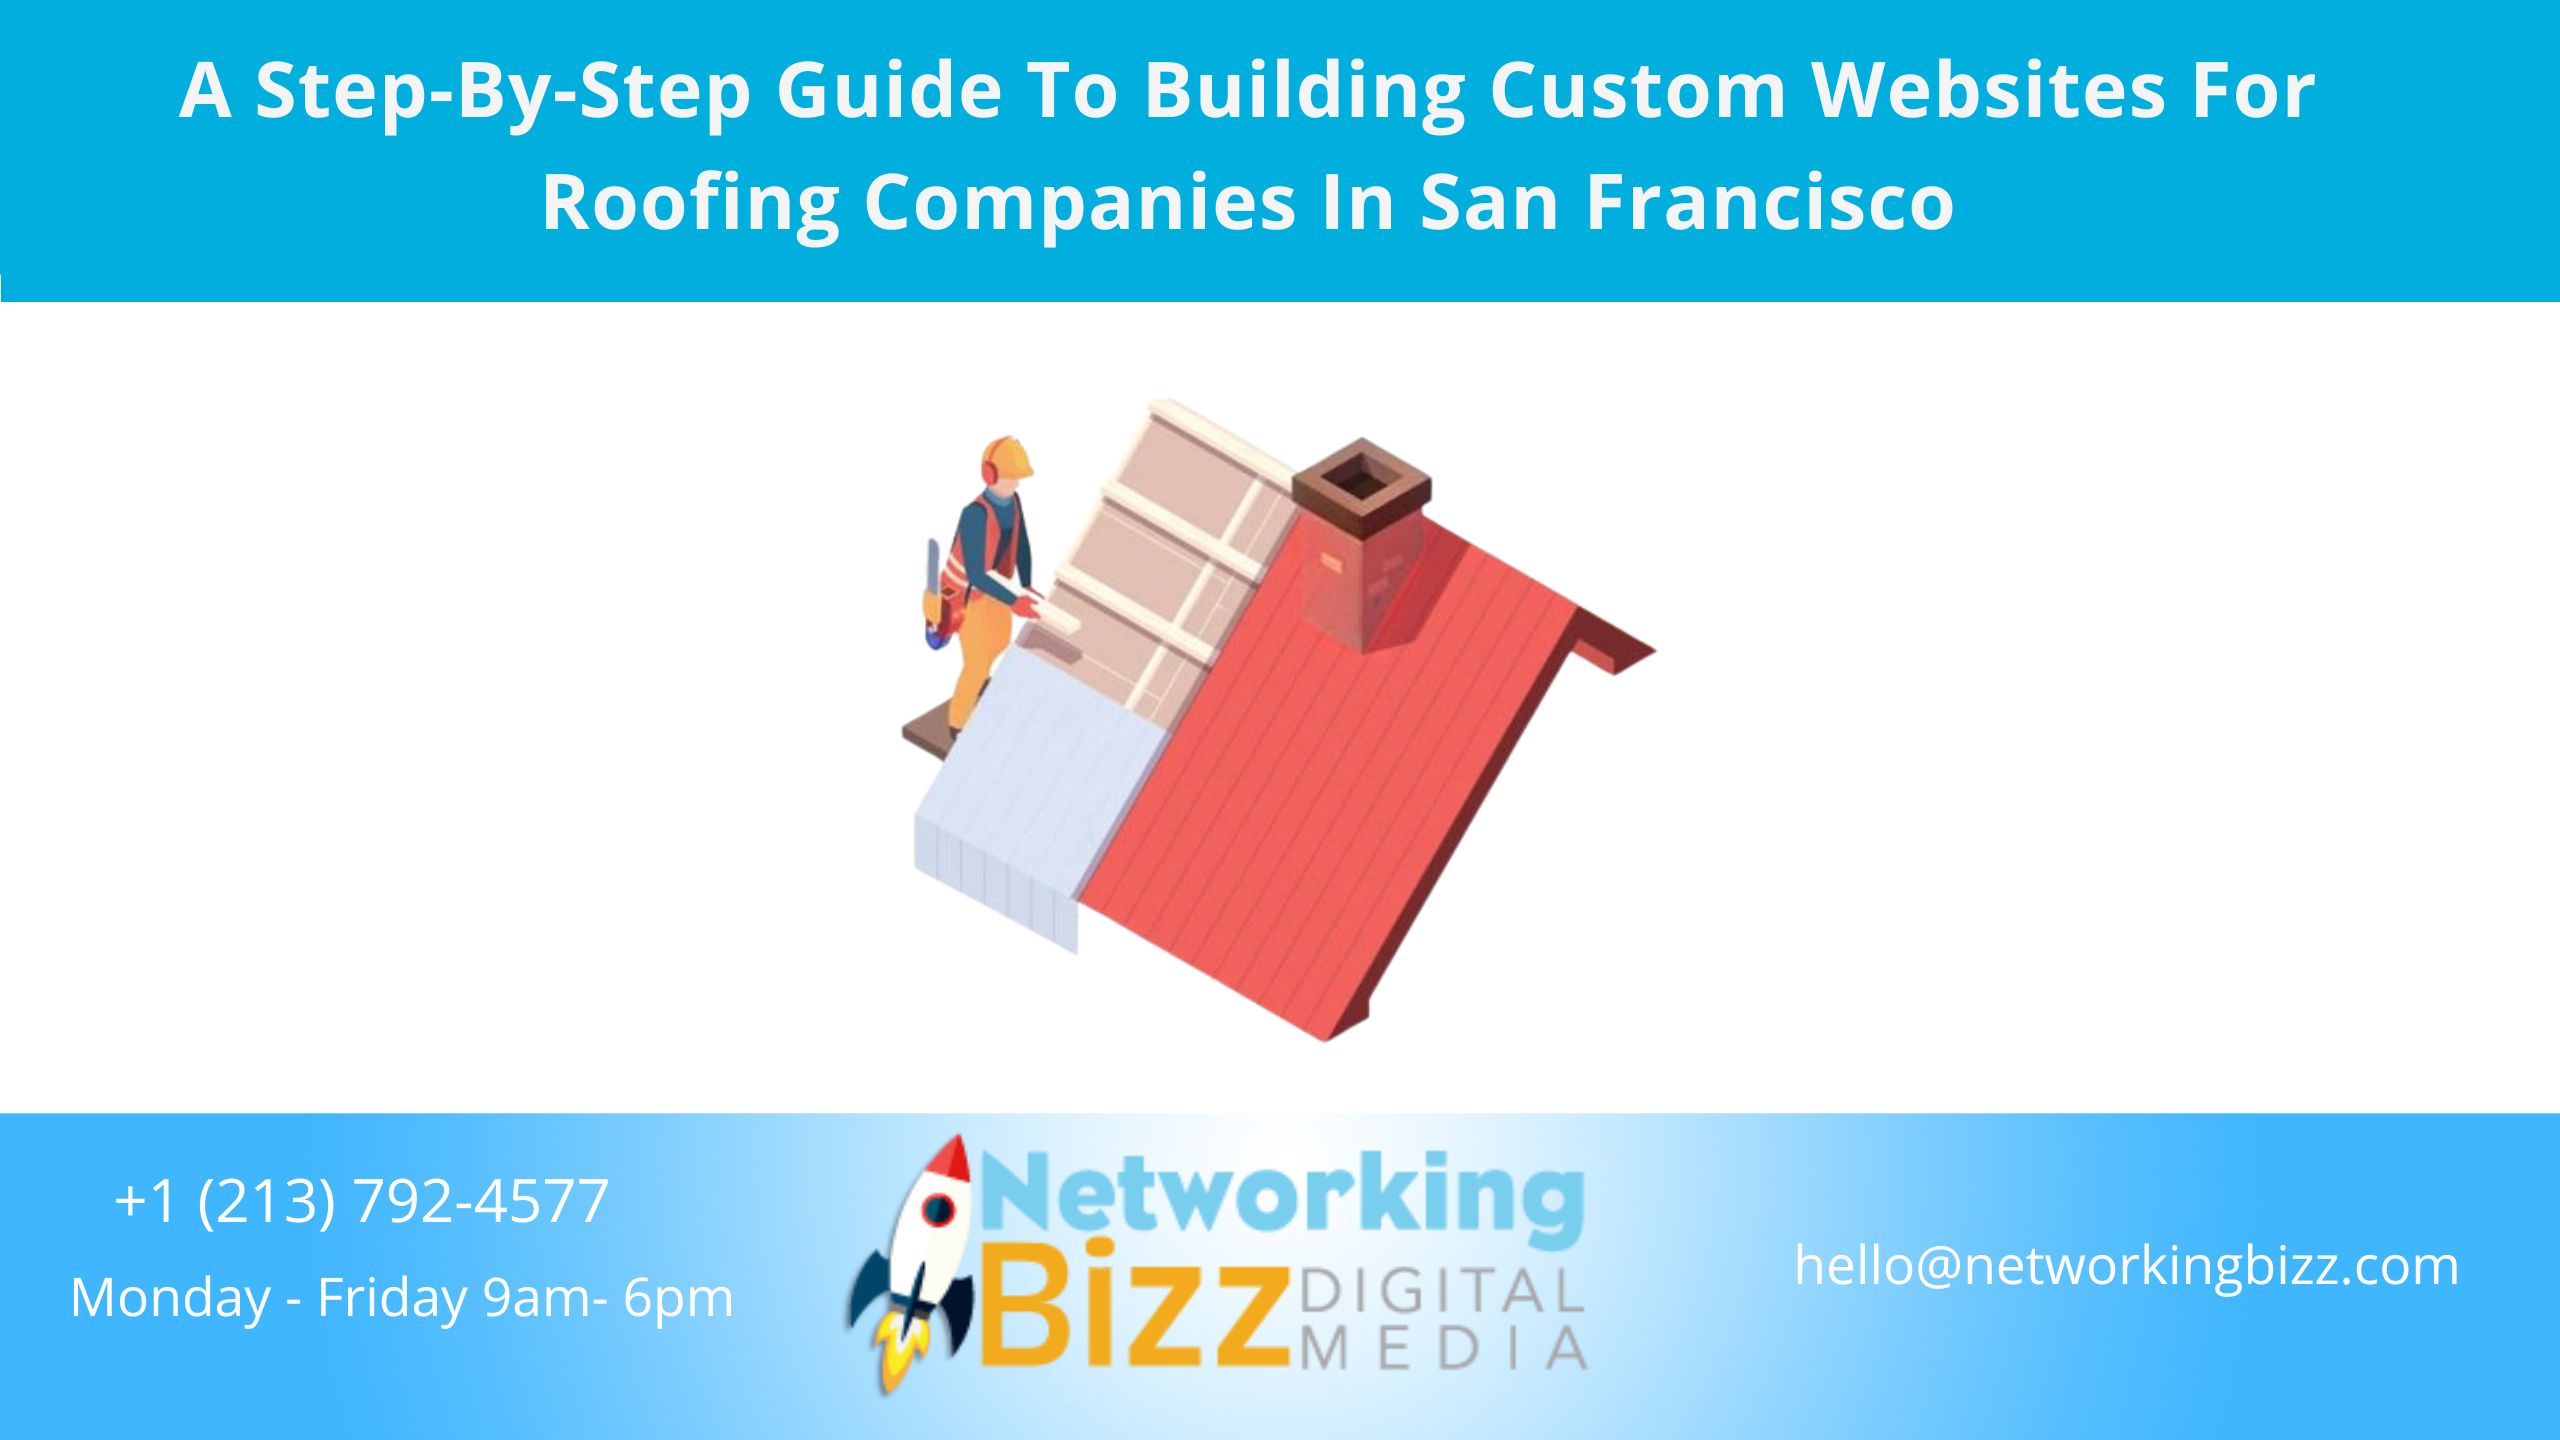 A Step-By-Step Guide To Building Custom Websites For Roofing Companies In San Francisco